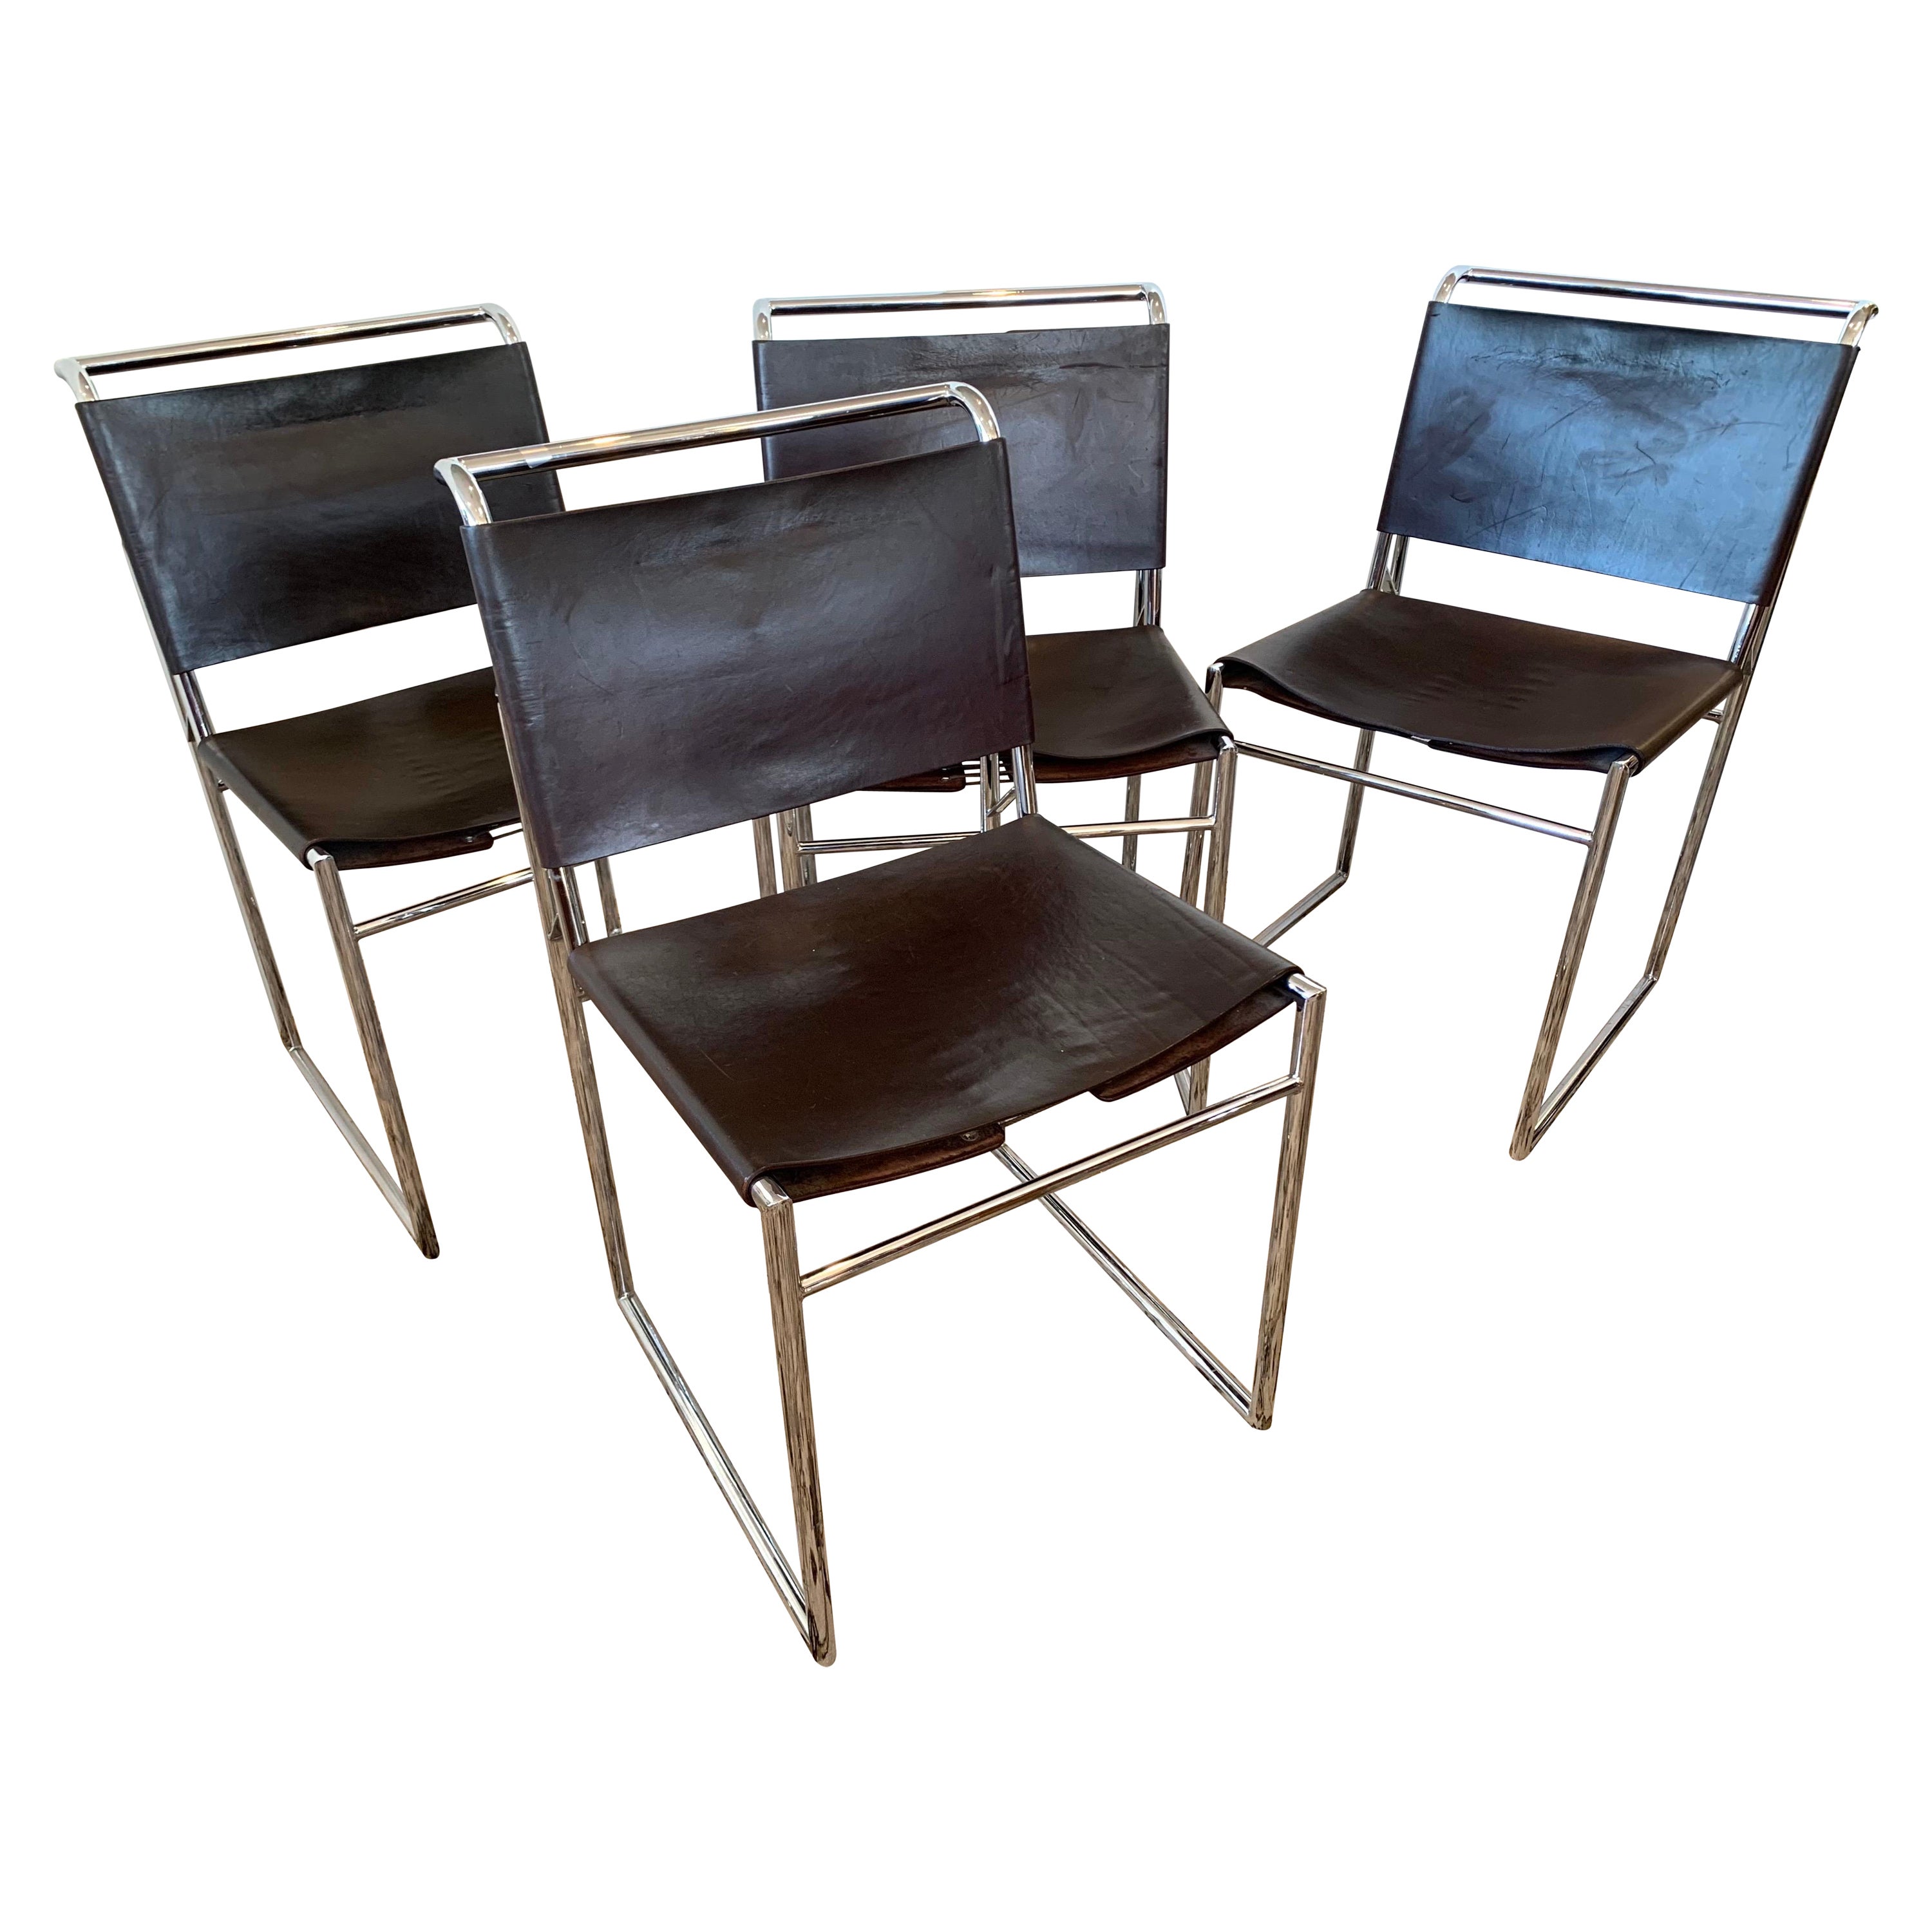 Marcel Breuer Mid Century Chrome and Leather B-40 Corset Chairs, Set of 4